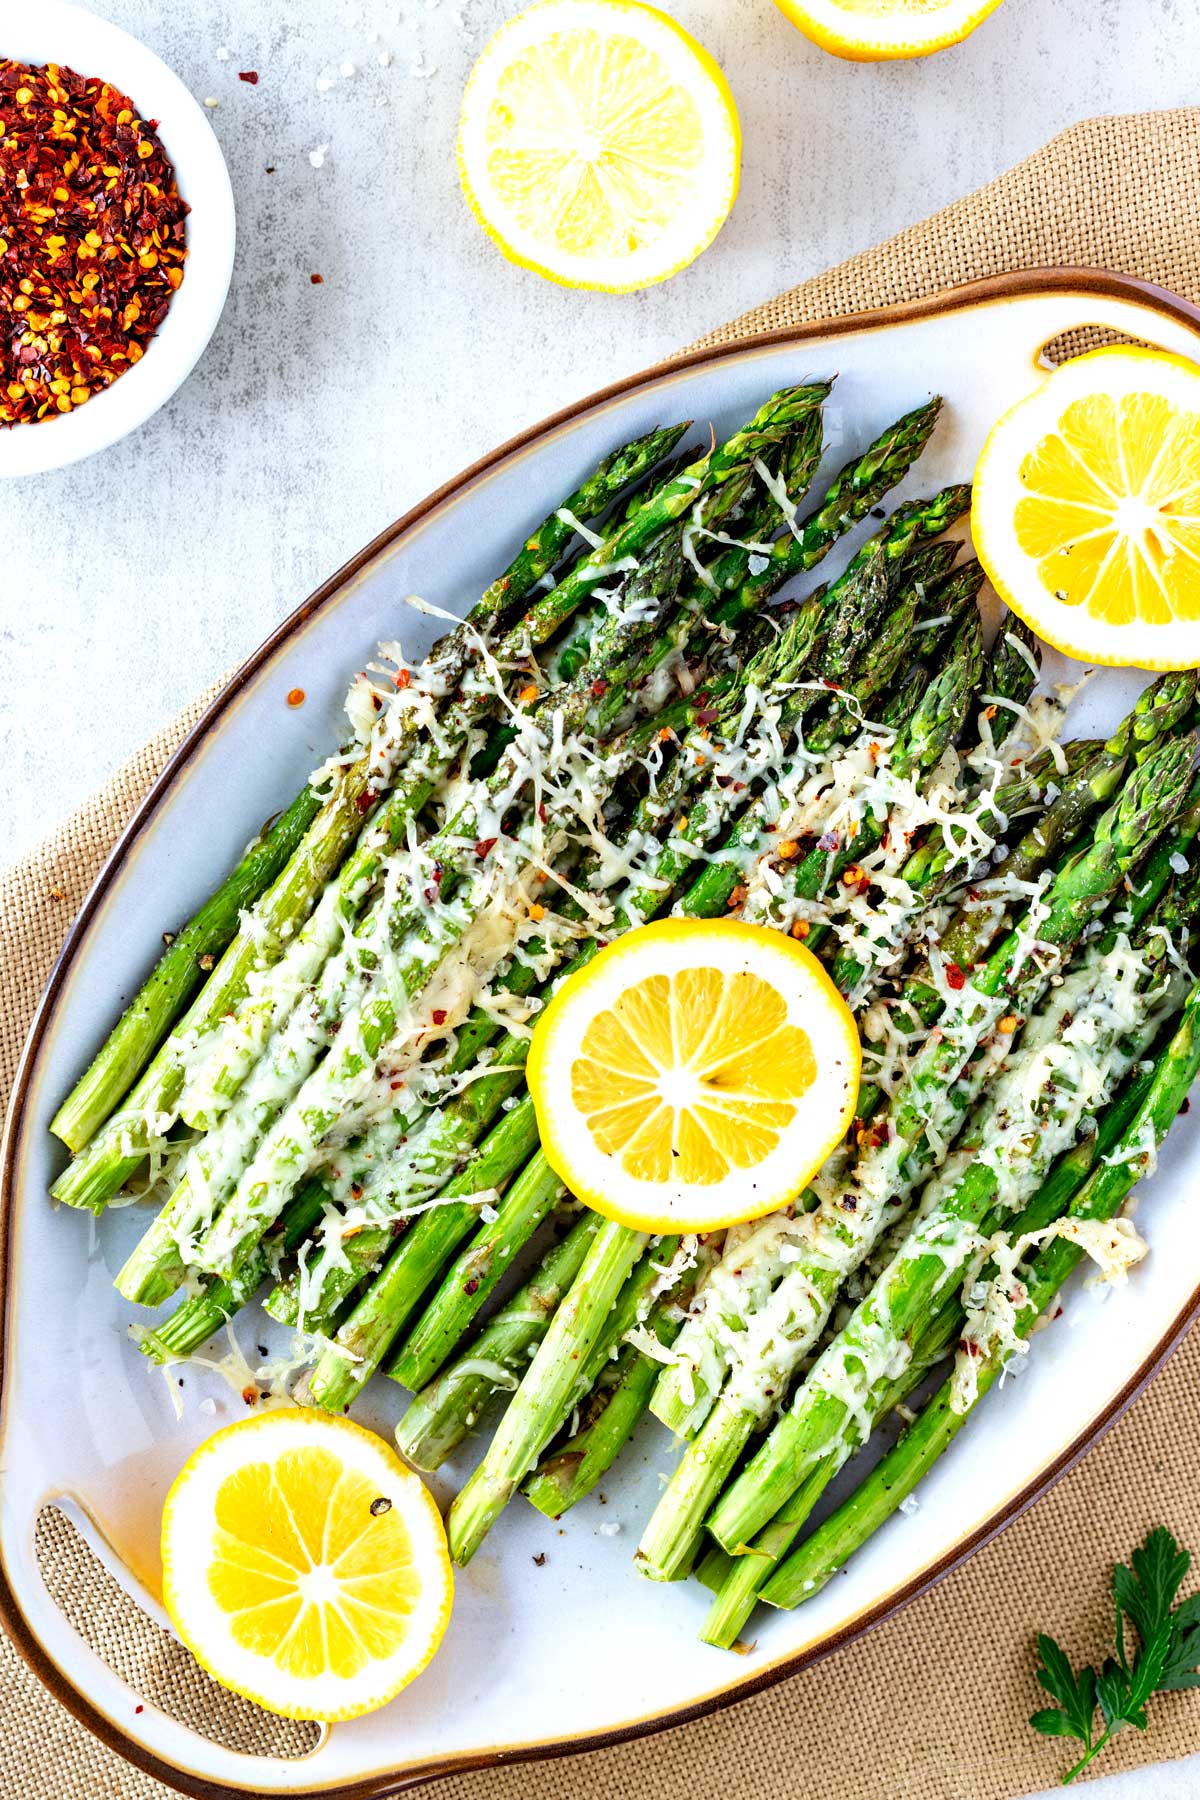 Photo of a platter of Baked Asparagus.